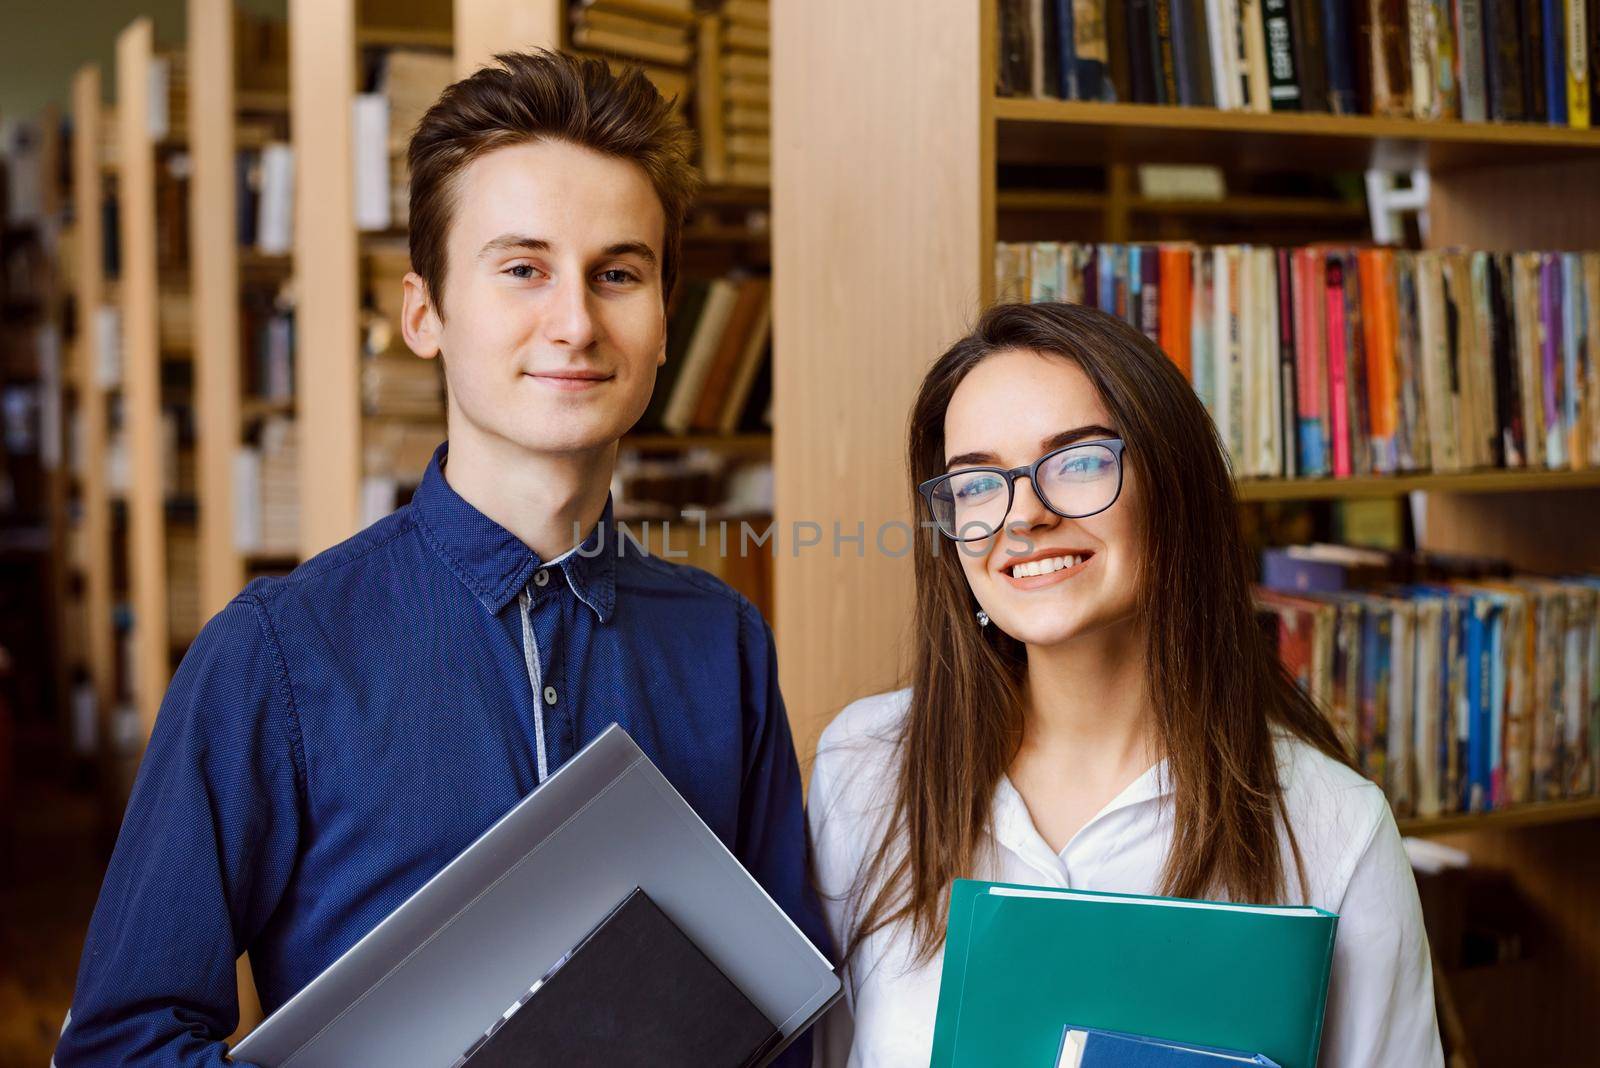 Students at the library in front of shelves of books, studying together, smiling to the camera, eager to study